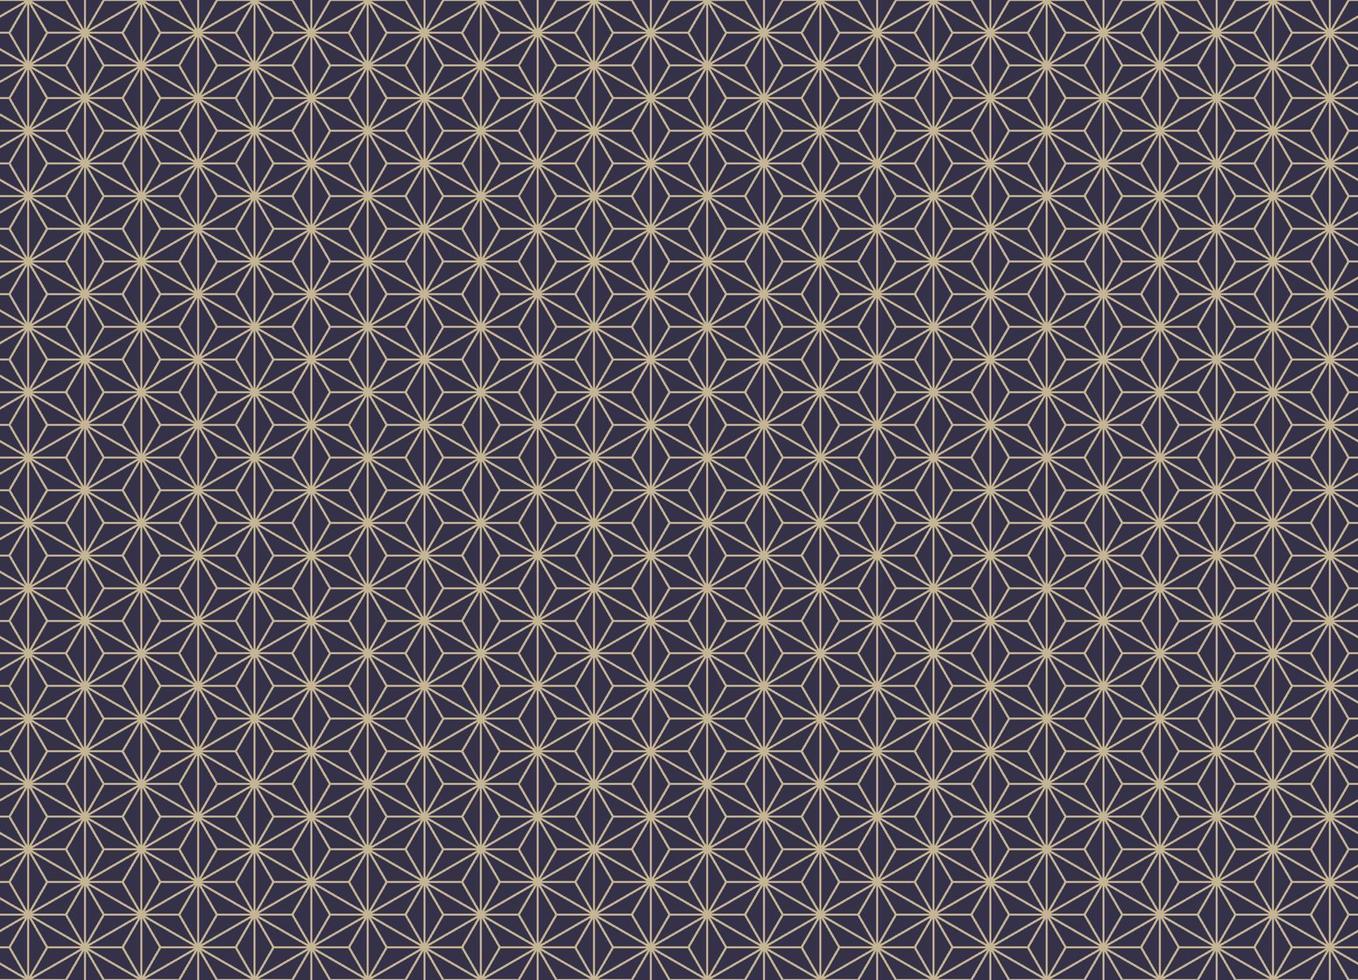 Isometric geometry line grid on dark blue seamless background. Japanese asanoha pattern contemporary color design. Use for fabric, textile, interior decoration elements, upholstery, wrapping. vector